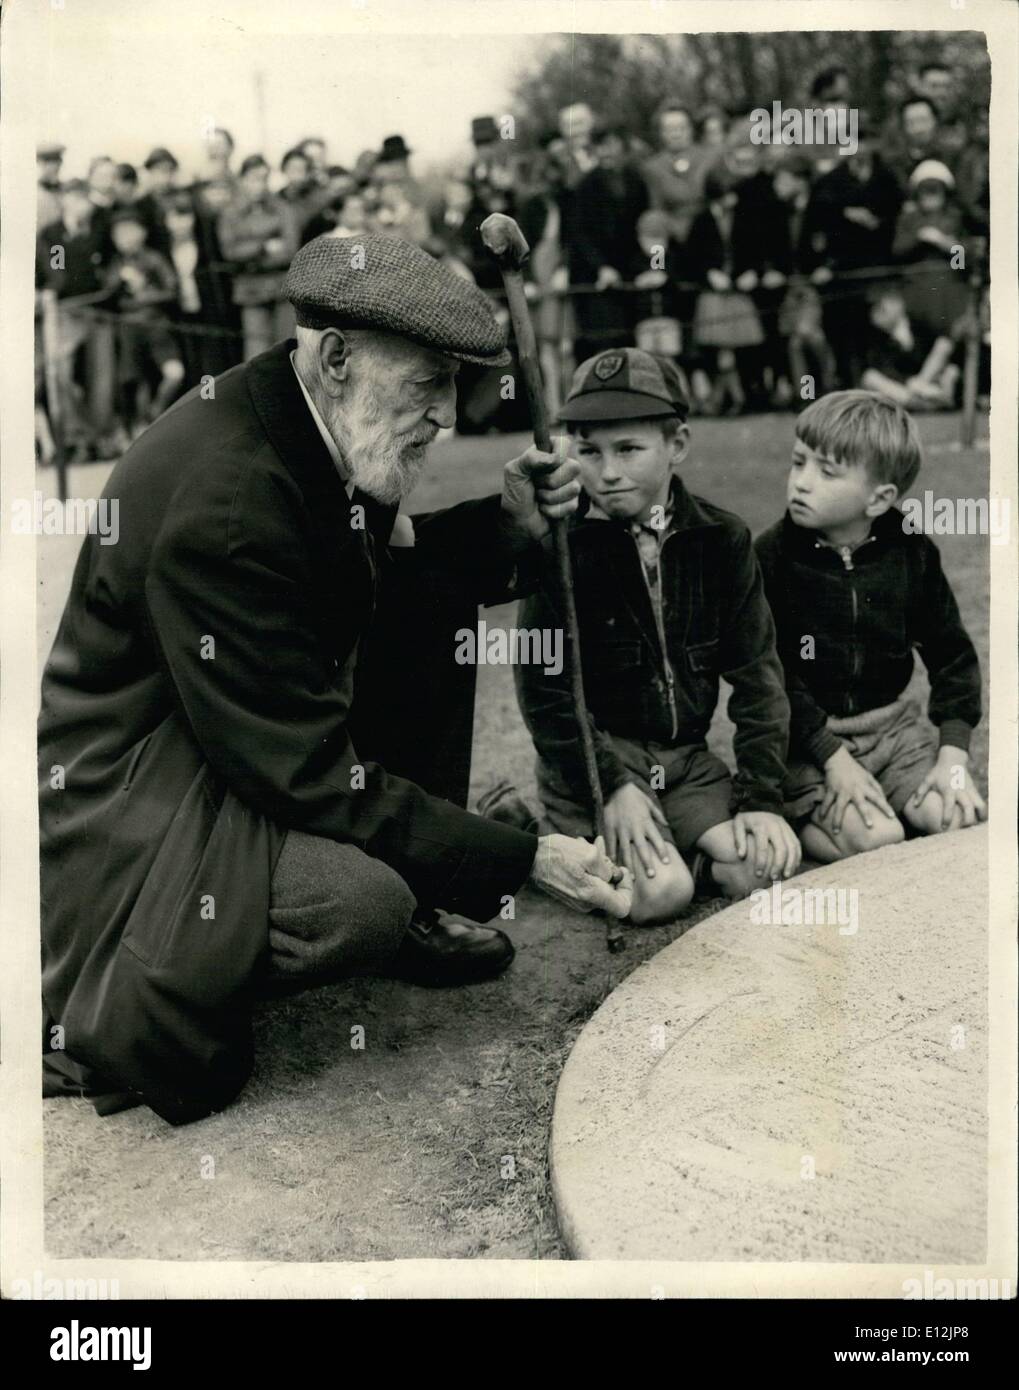 Feb. 24, 2012 - Annual Marbles Championship in Surrey ''Pop'' Maynard And The Youngsters: The annual Good Friday Marbles Championship was held today at Tinsley Green, Surrey. Photo shows George ''Pop:'' Maynard the 84 year old Captain of the ''Copthorne Spitfires'' - in play watched by two youngsters brothers Richard (10) and Frank (7) Goodedge - at Tinsley Green this morning. Stock Photo